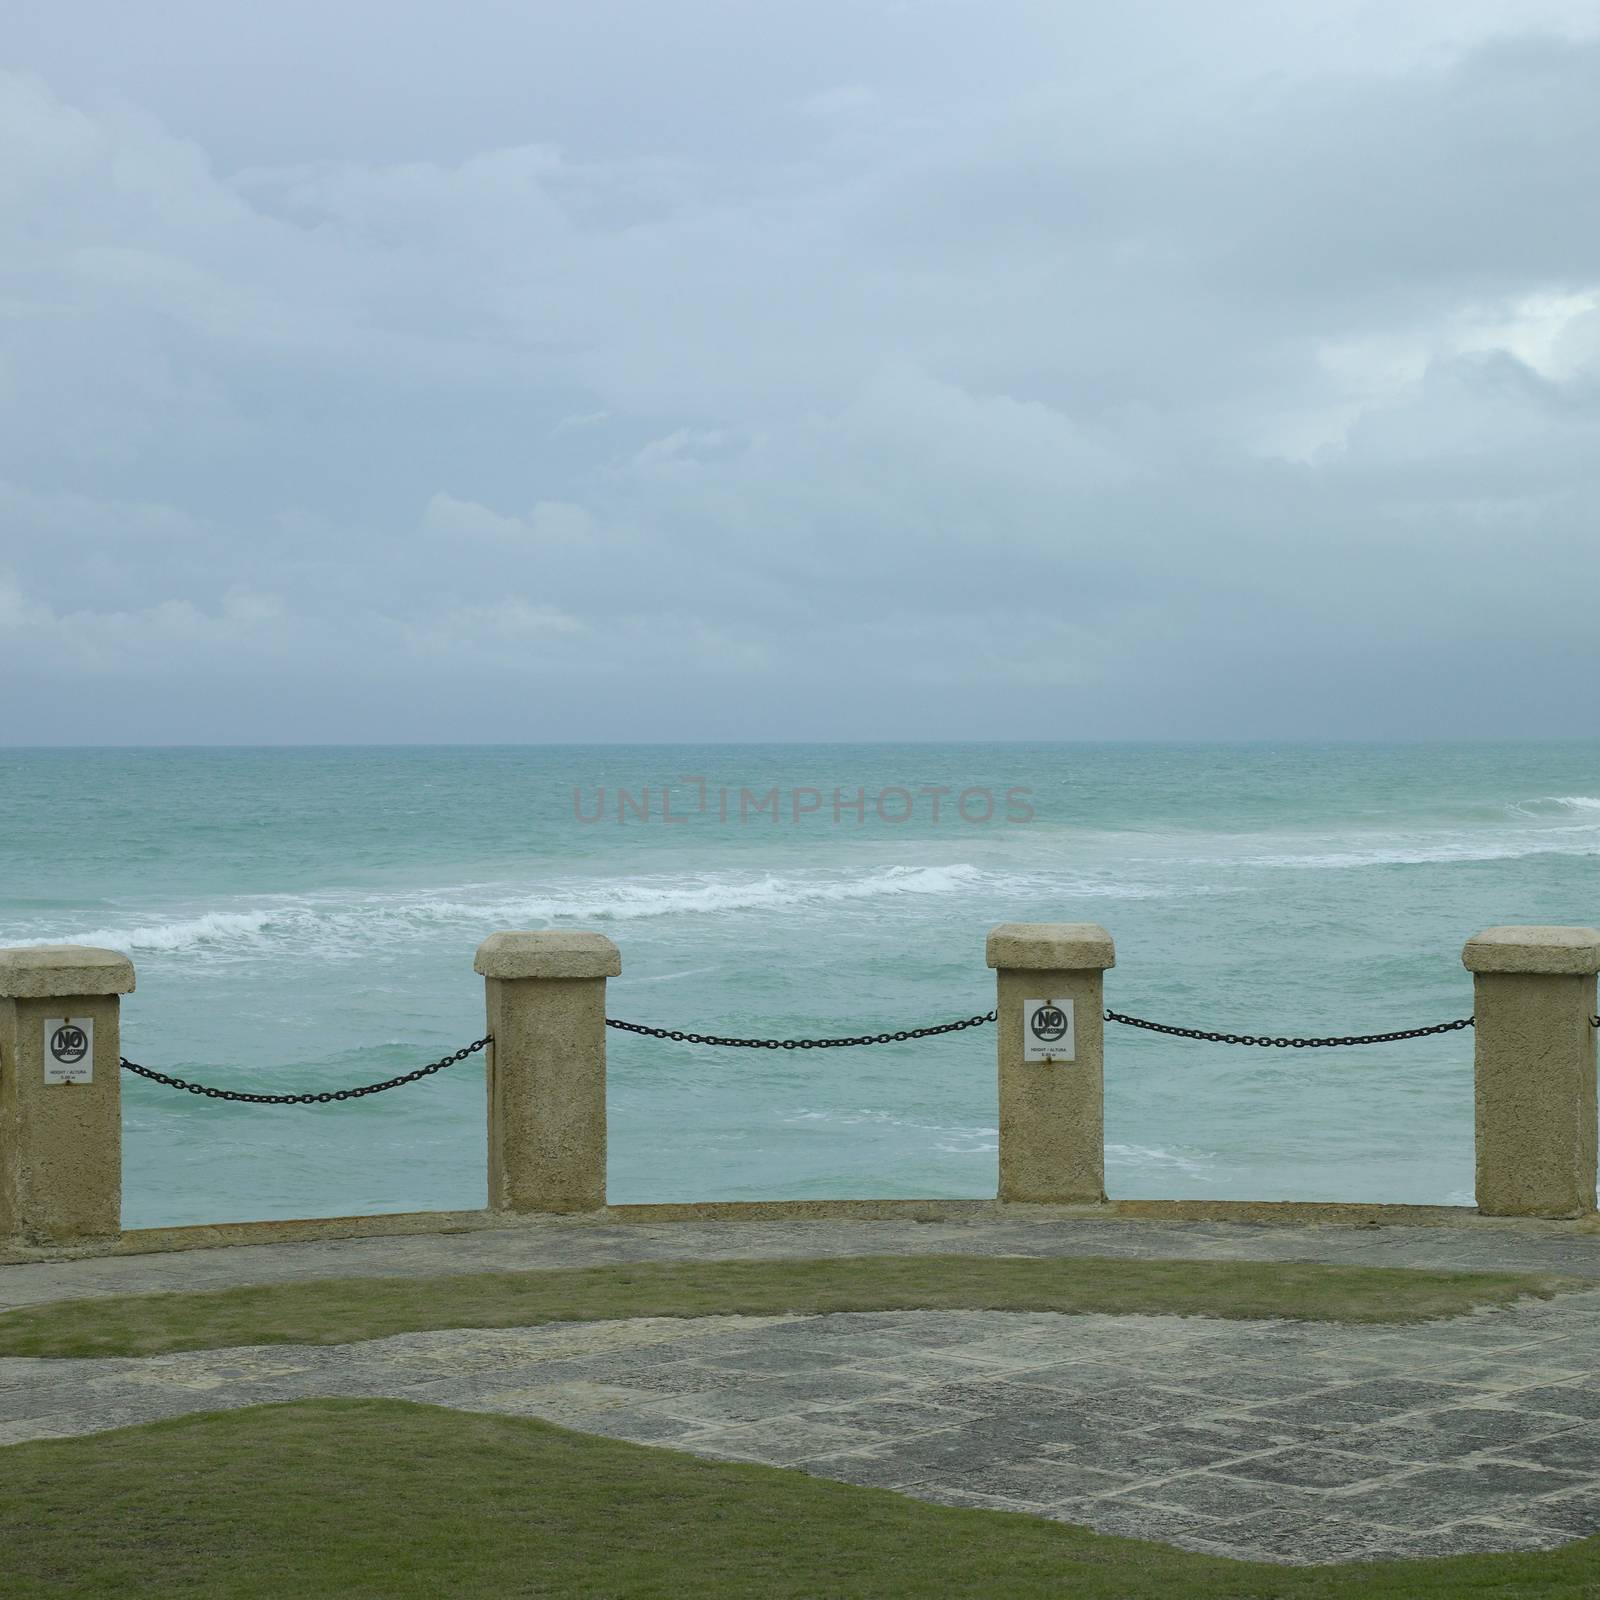 Pillar and chain fence overlooking the tropical ocean